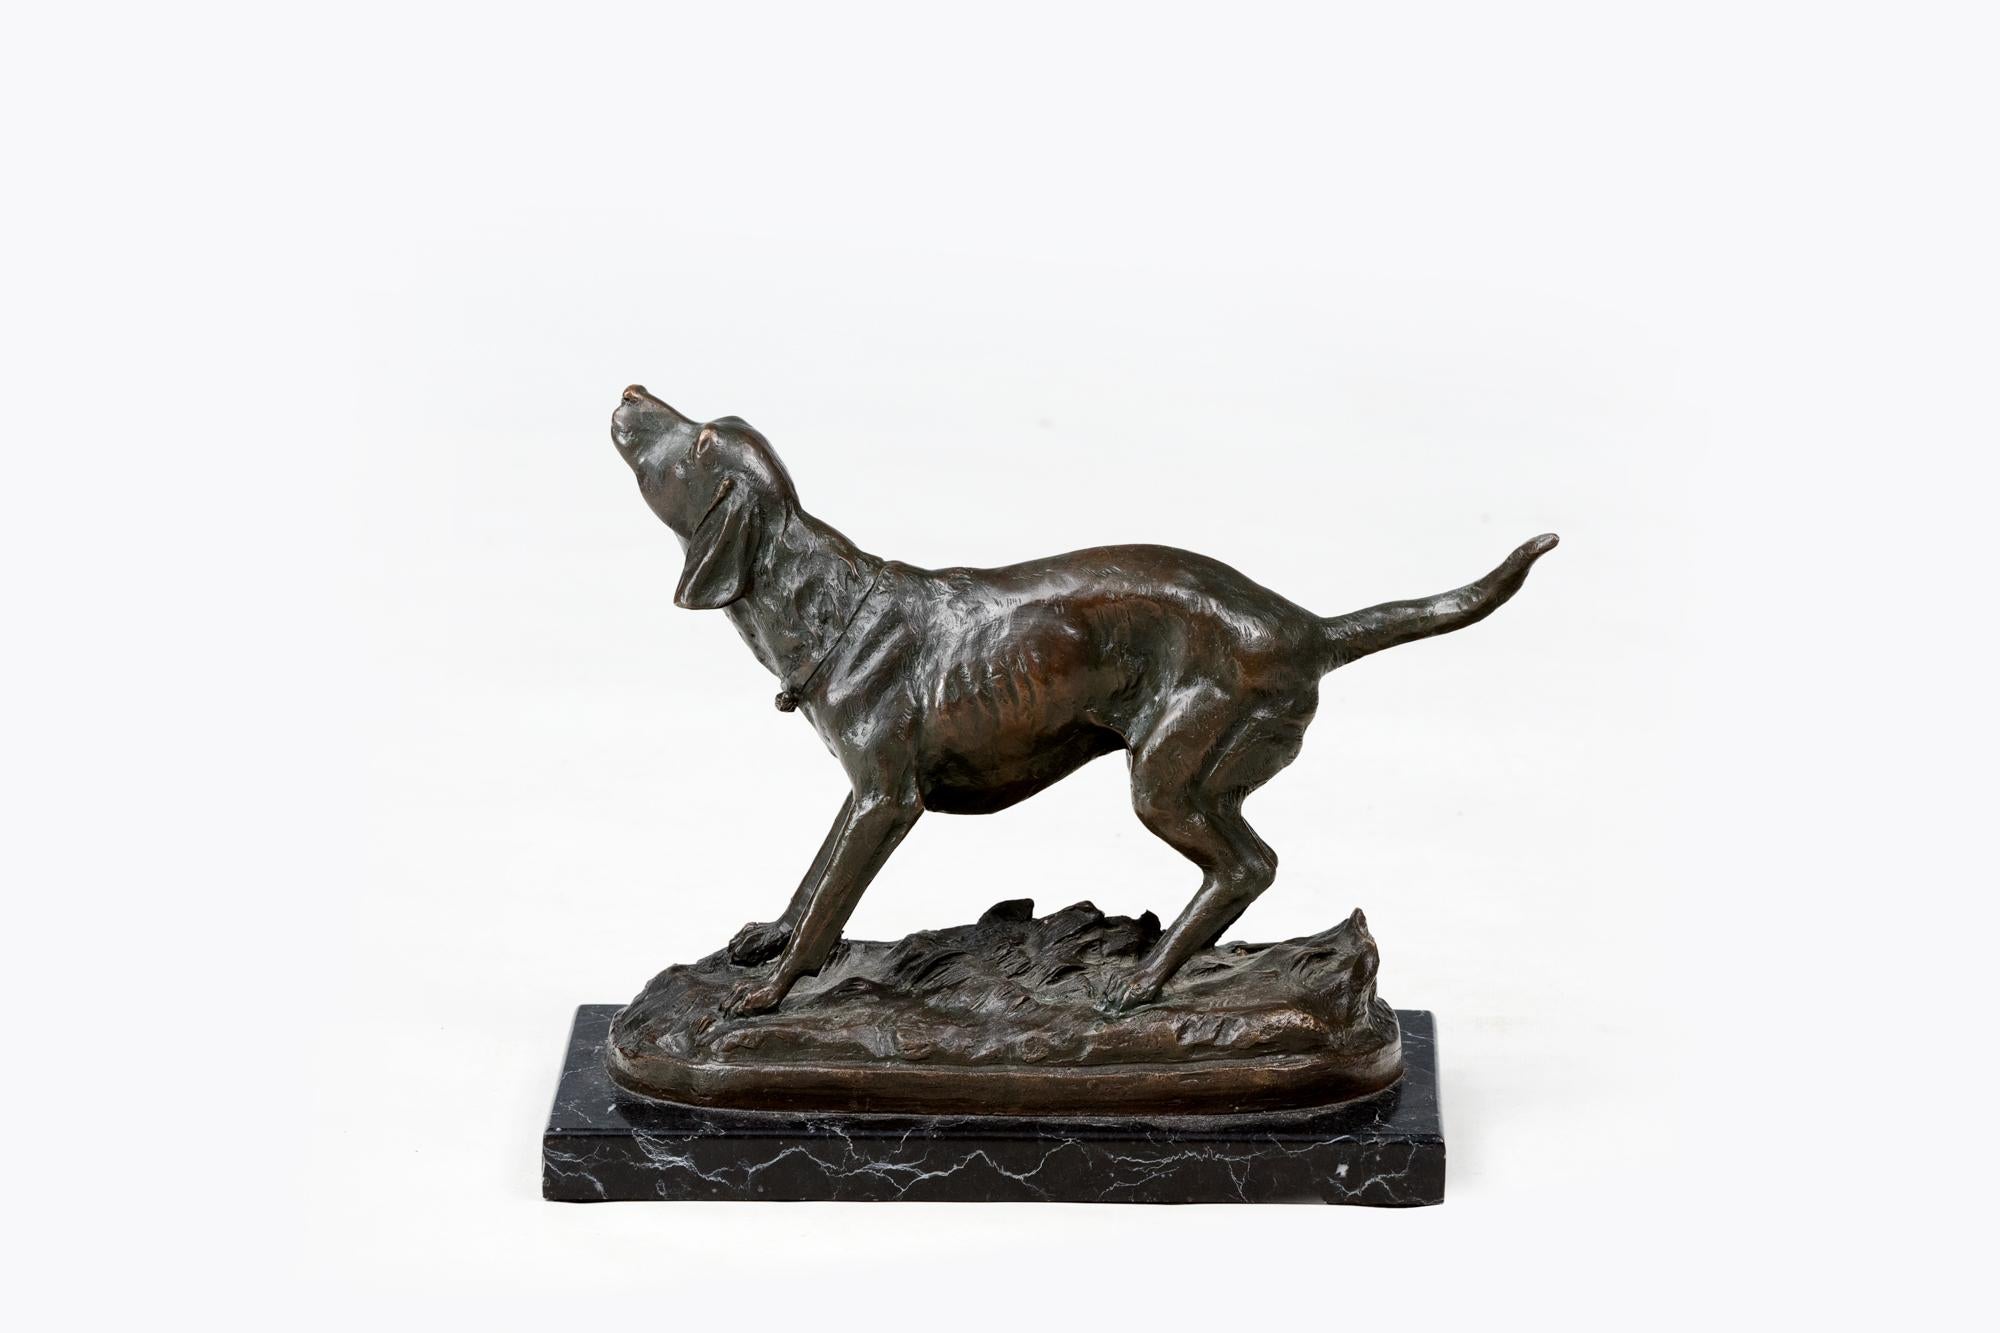 20th Century Bronze Sculpture of a Hunting Dog by the artist Miguel Fernando López (Milo). Depicting an alert dog on a naturalistic base signed 'Milo'. Raised on a black marble plinth.